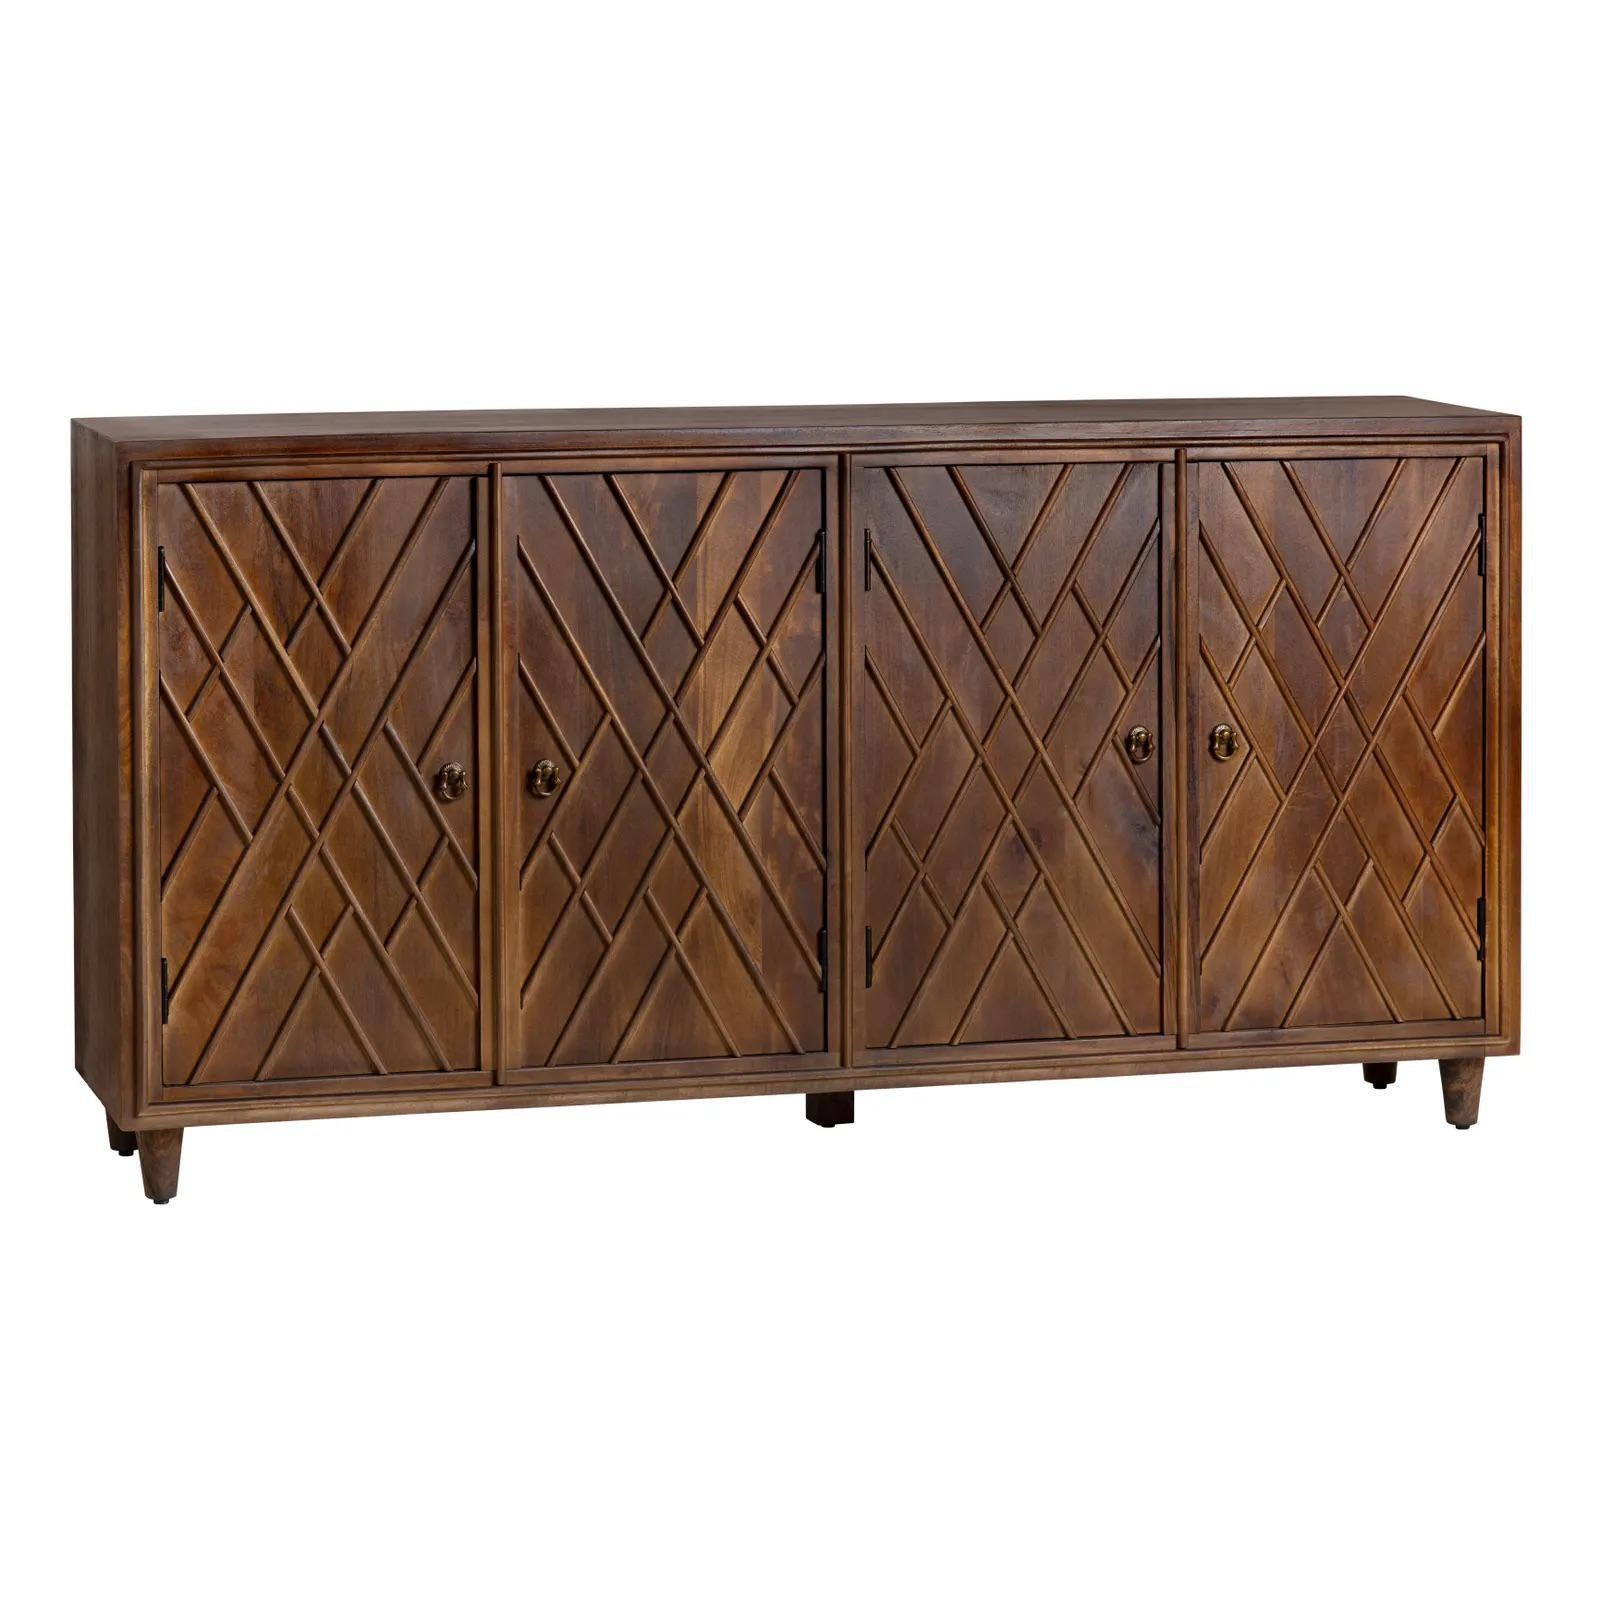 Chippendale Four Door Sideboard - 72"L x 37"H